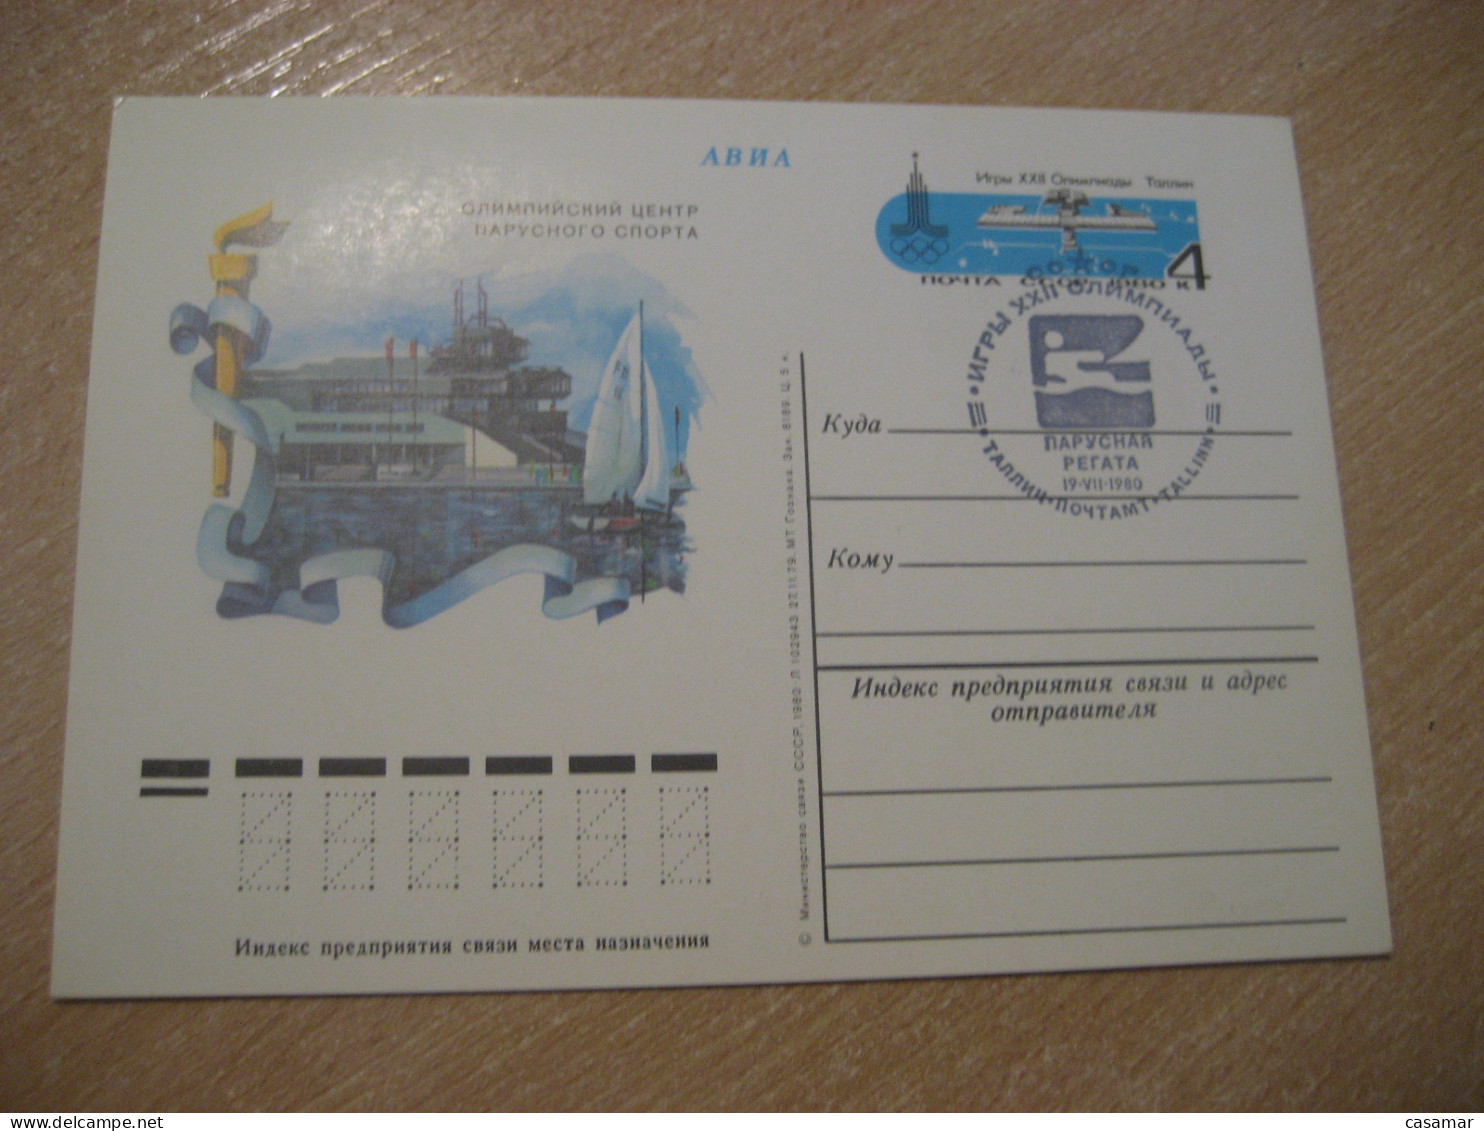 TALLINN 1980 Sail Sailing Moscow Olympic Games Olympics Torch Cancel Postal Stationery Card RUSSIA USSR - Estate 1980: Mosca